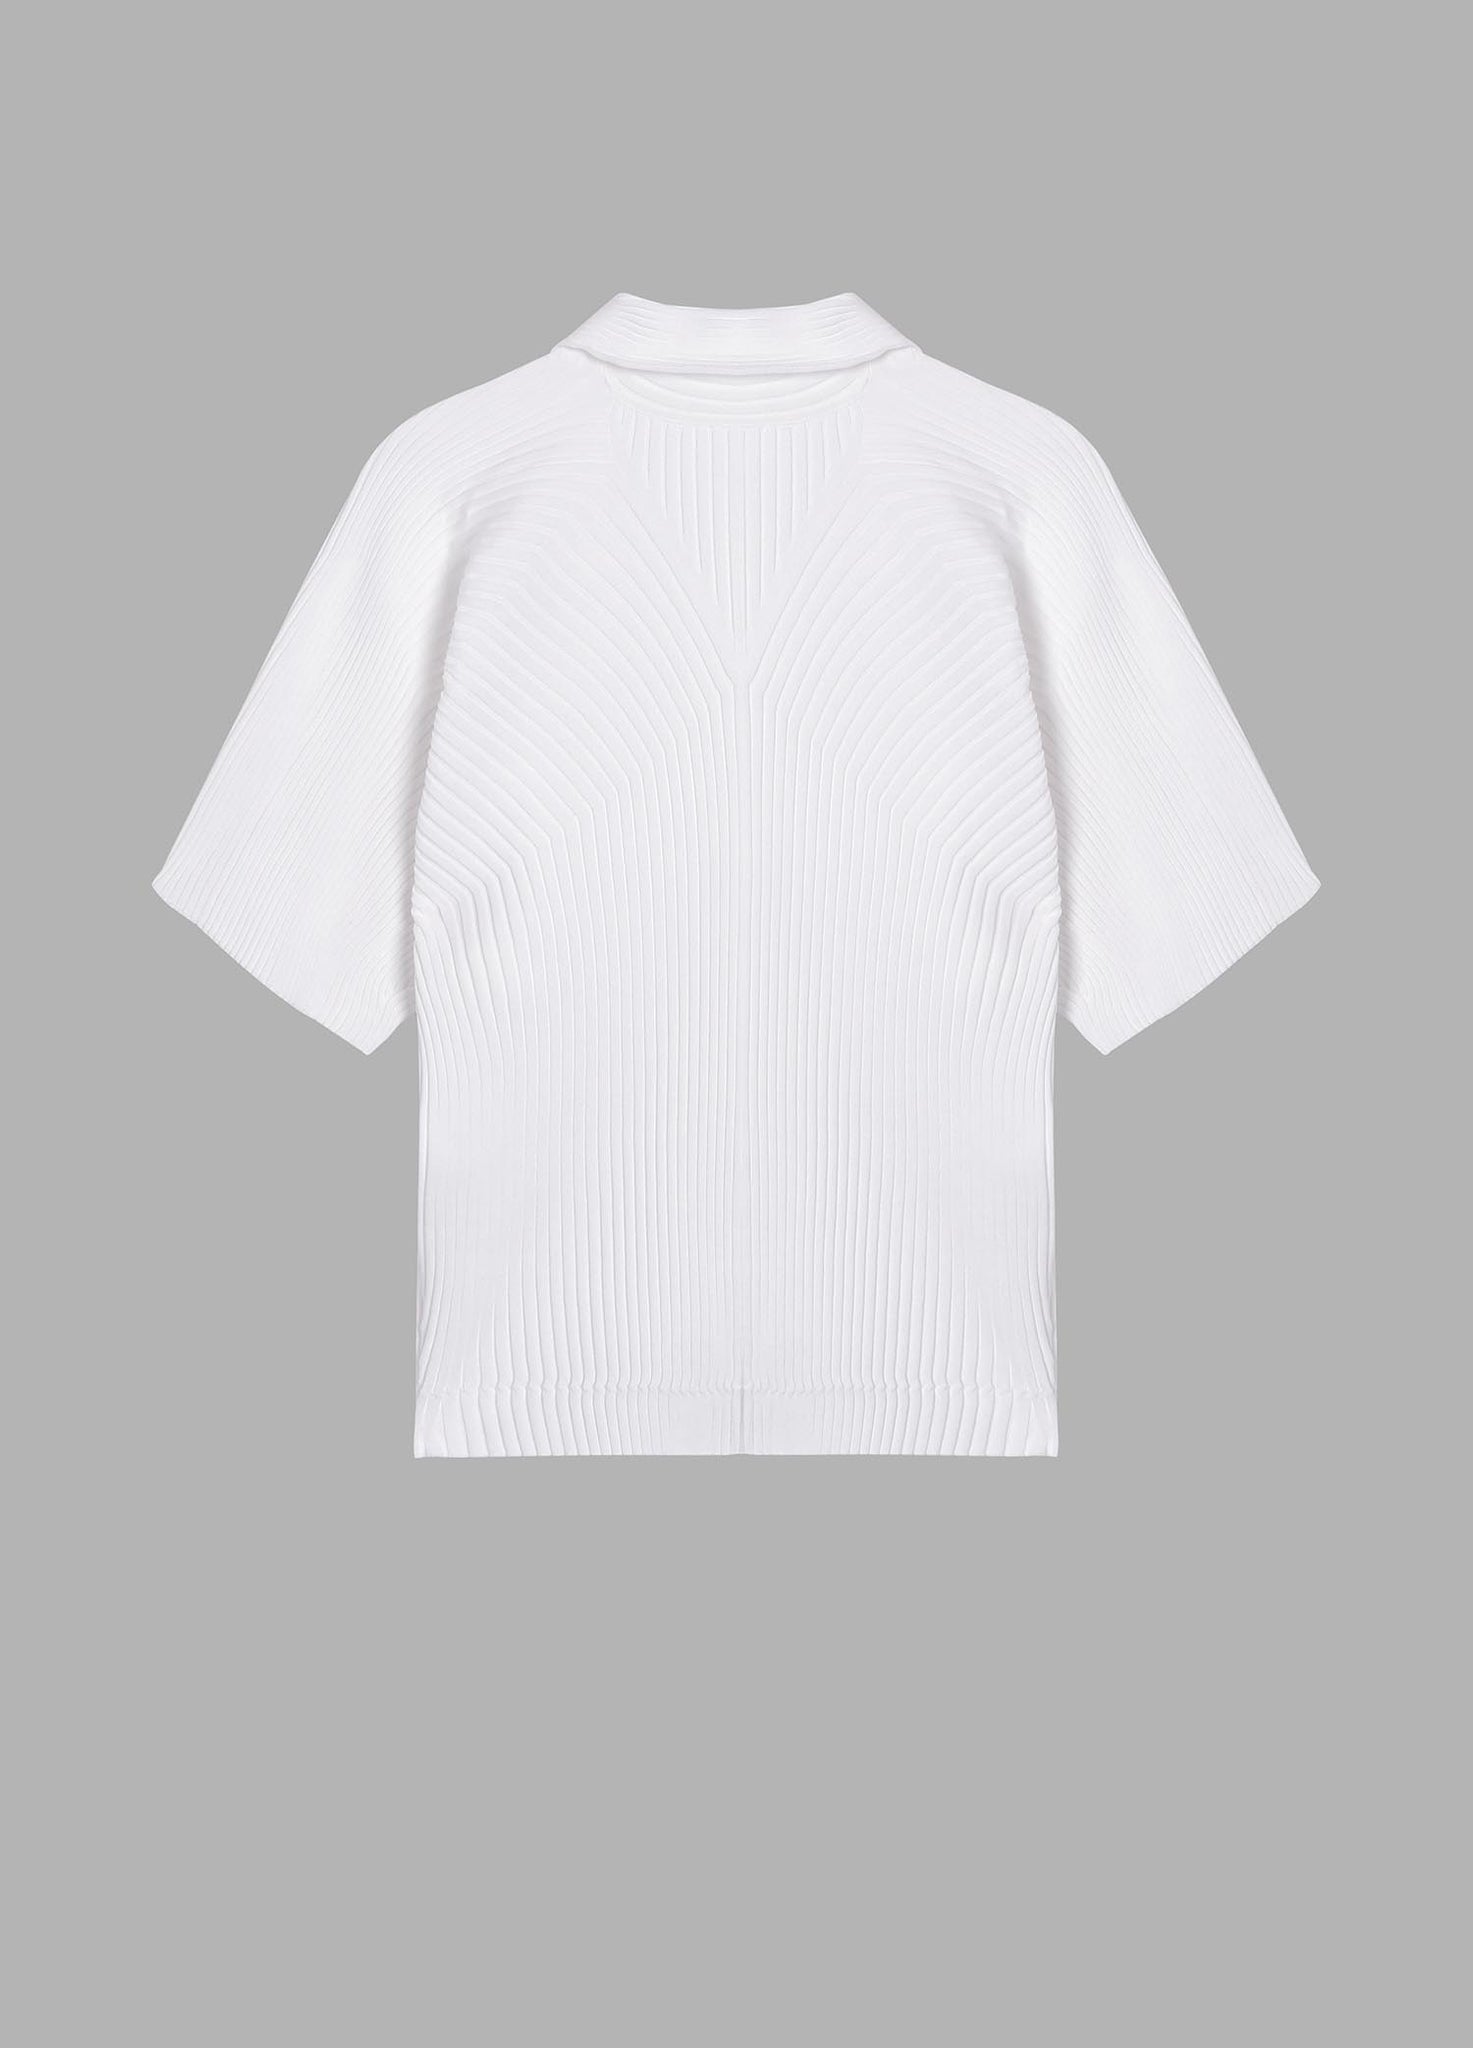 Sweater / JNBY Stripe Texture Short Sleeve Pullover Sweater